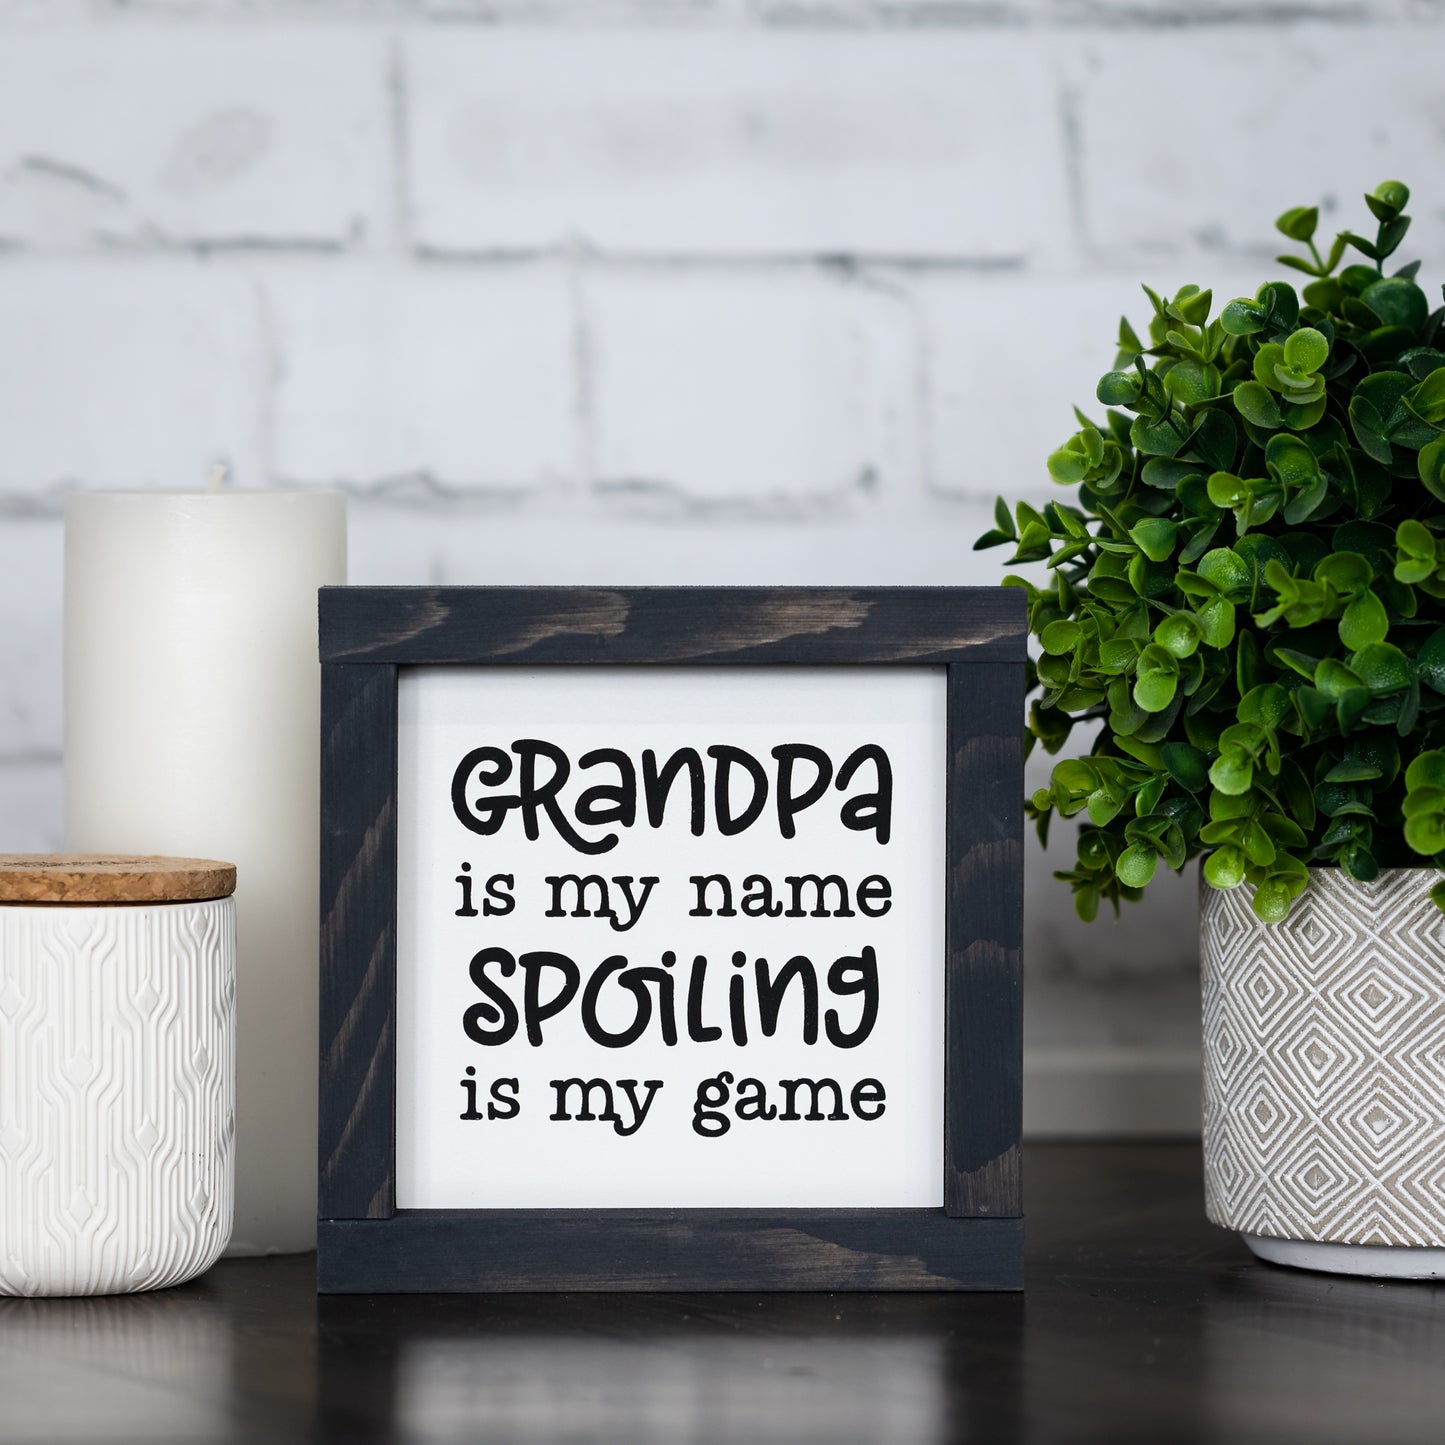 grandpa is my name, spoiling is my game ~ wood sign